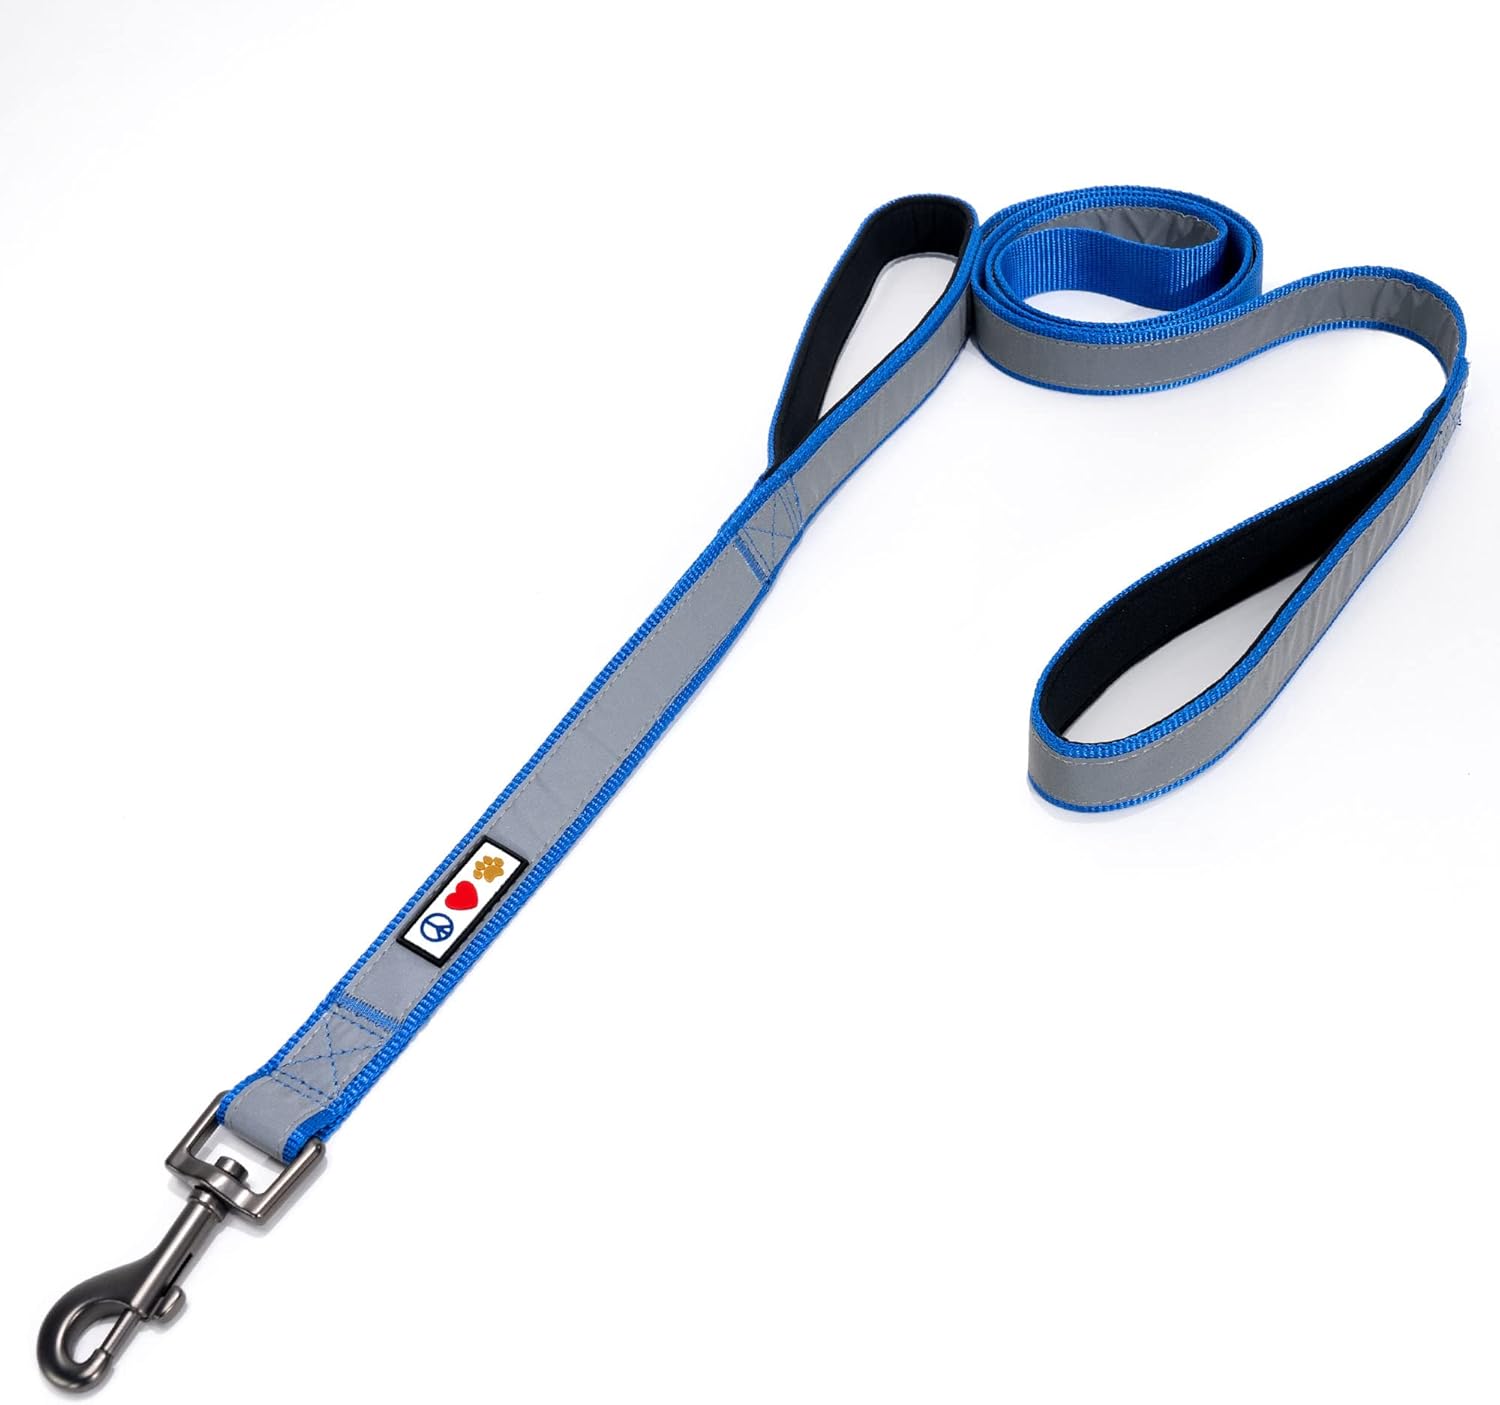 PAWTITAS Puppy Dog Training Double Handle Reflective Lead | Reflective Short Dog Lead for Training | Hands Free Running Dog Lead | 1.8 M Reflective Dog Lead Comfortable Padded Handle - Blue Lead